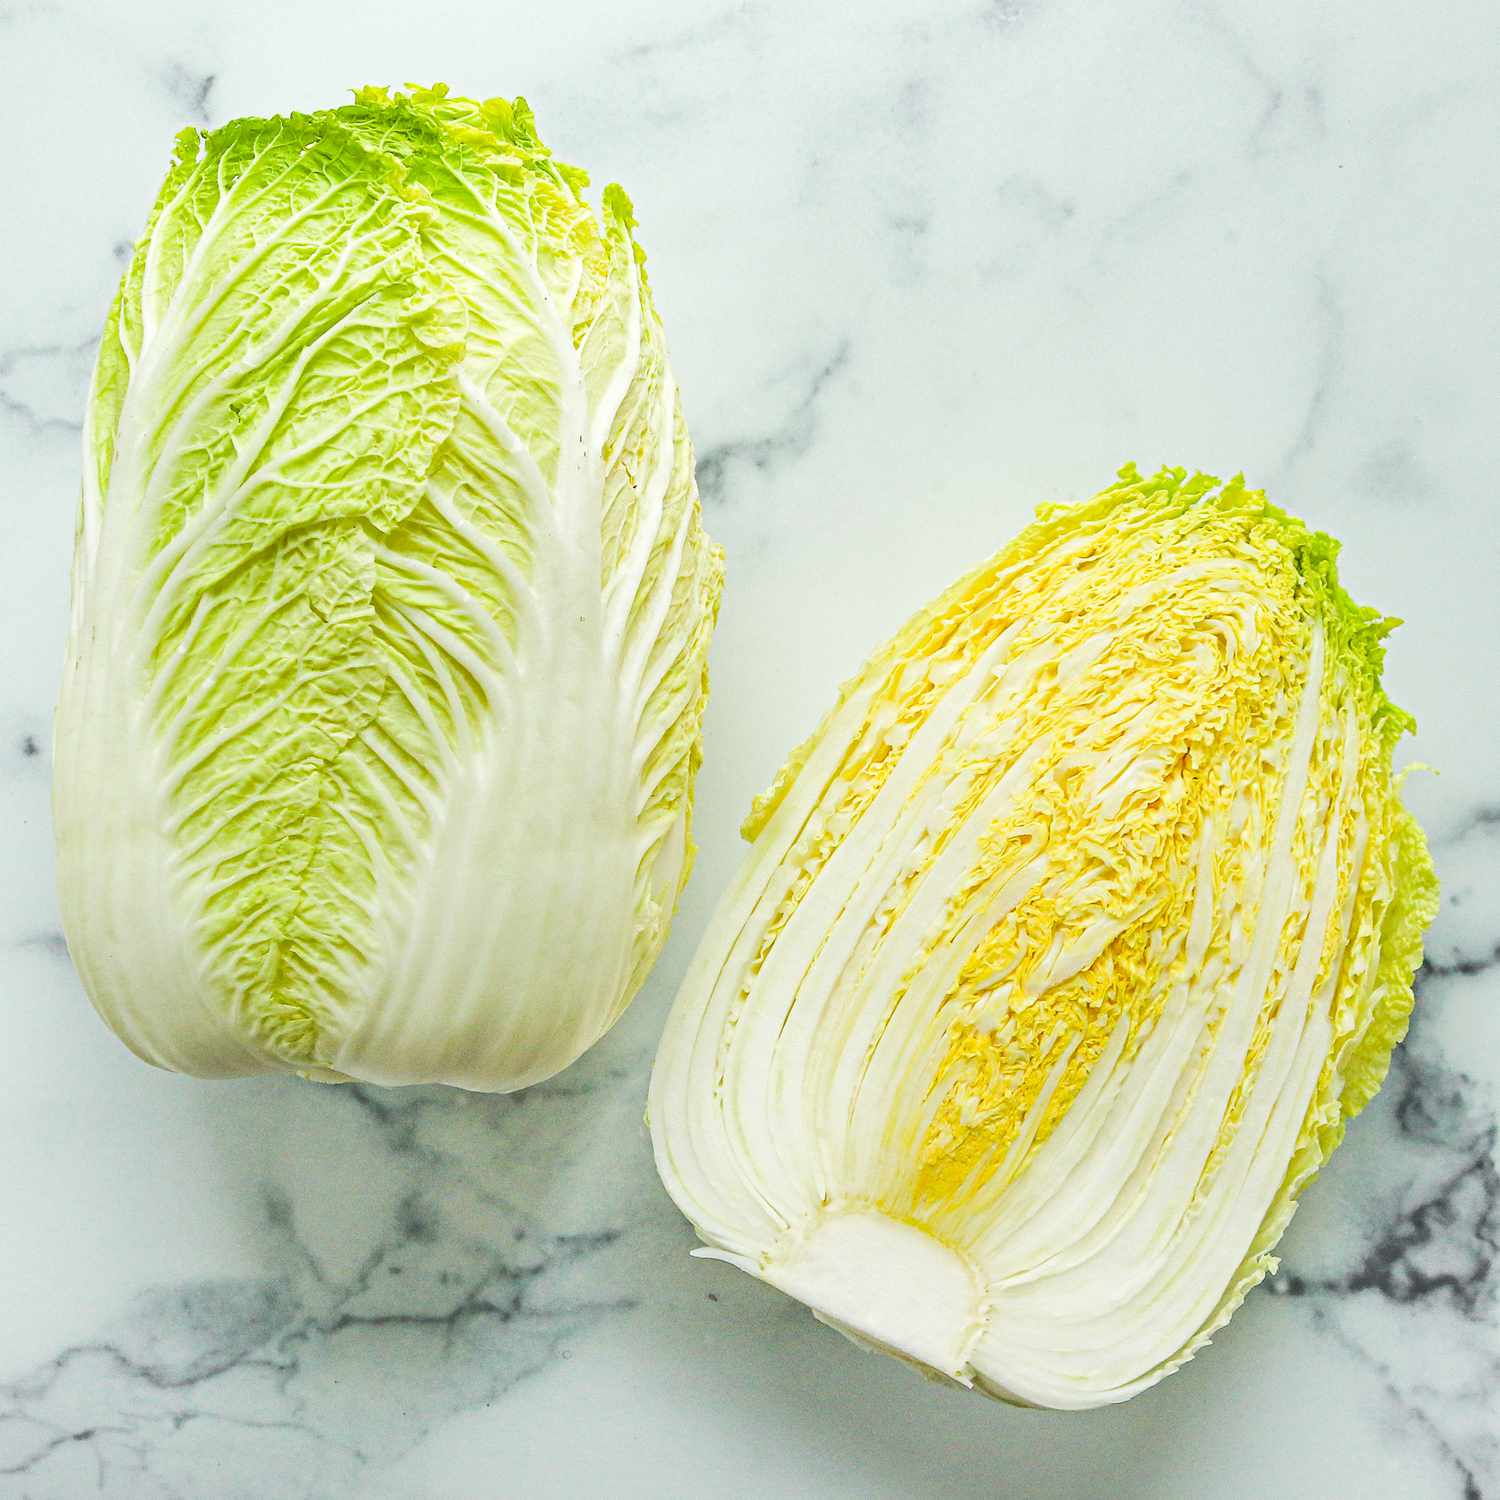 Napa cabbage on a marble surface